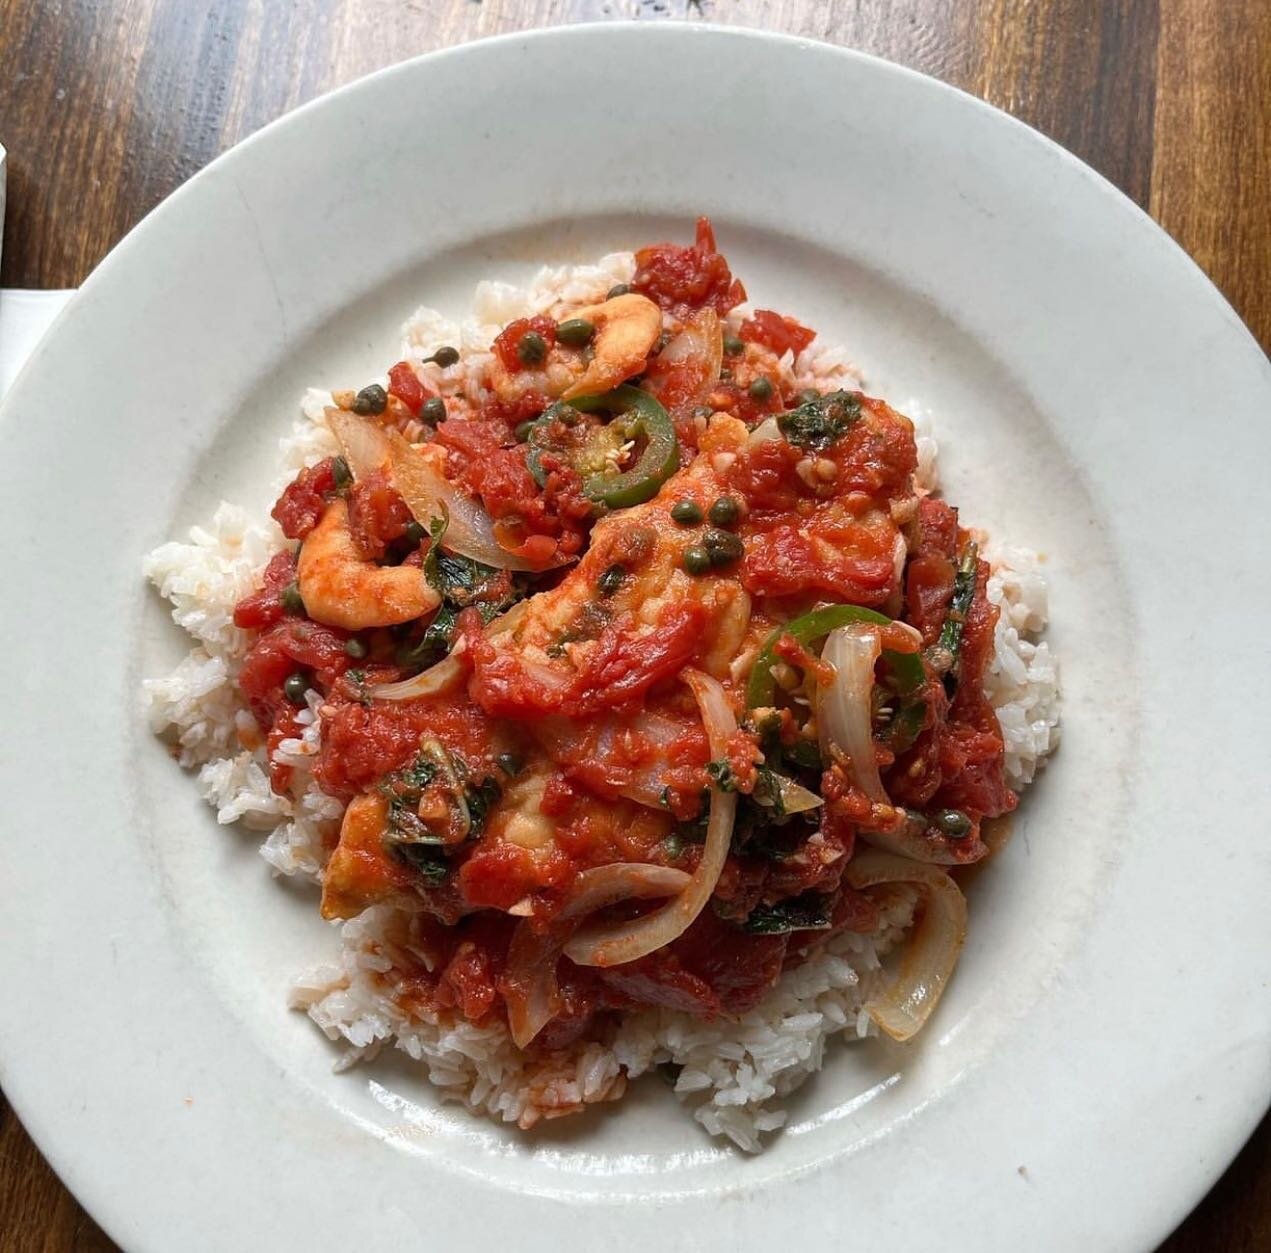 WEEKEND SPECIAL ALERT!
Chicken and shrimp in a tomato salsa with basil, capers, onions and jalape&ntilde;os. Served with black beans and rice!(vegan option available)
Drink special: Passion fruit mint mojito

#lawrencema #workshop #goodeats